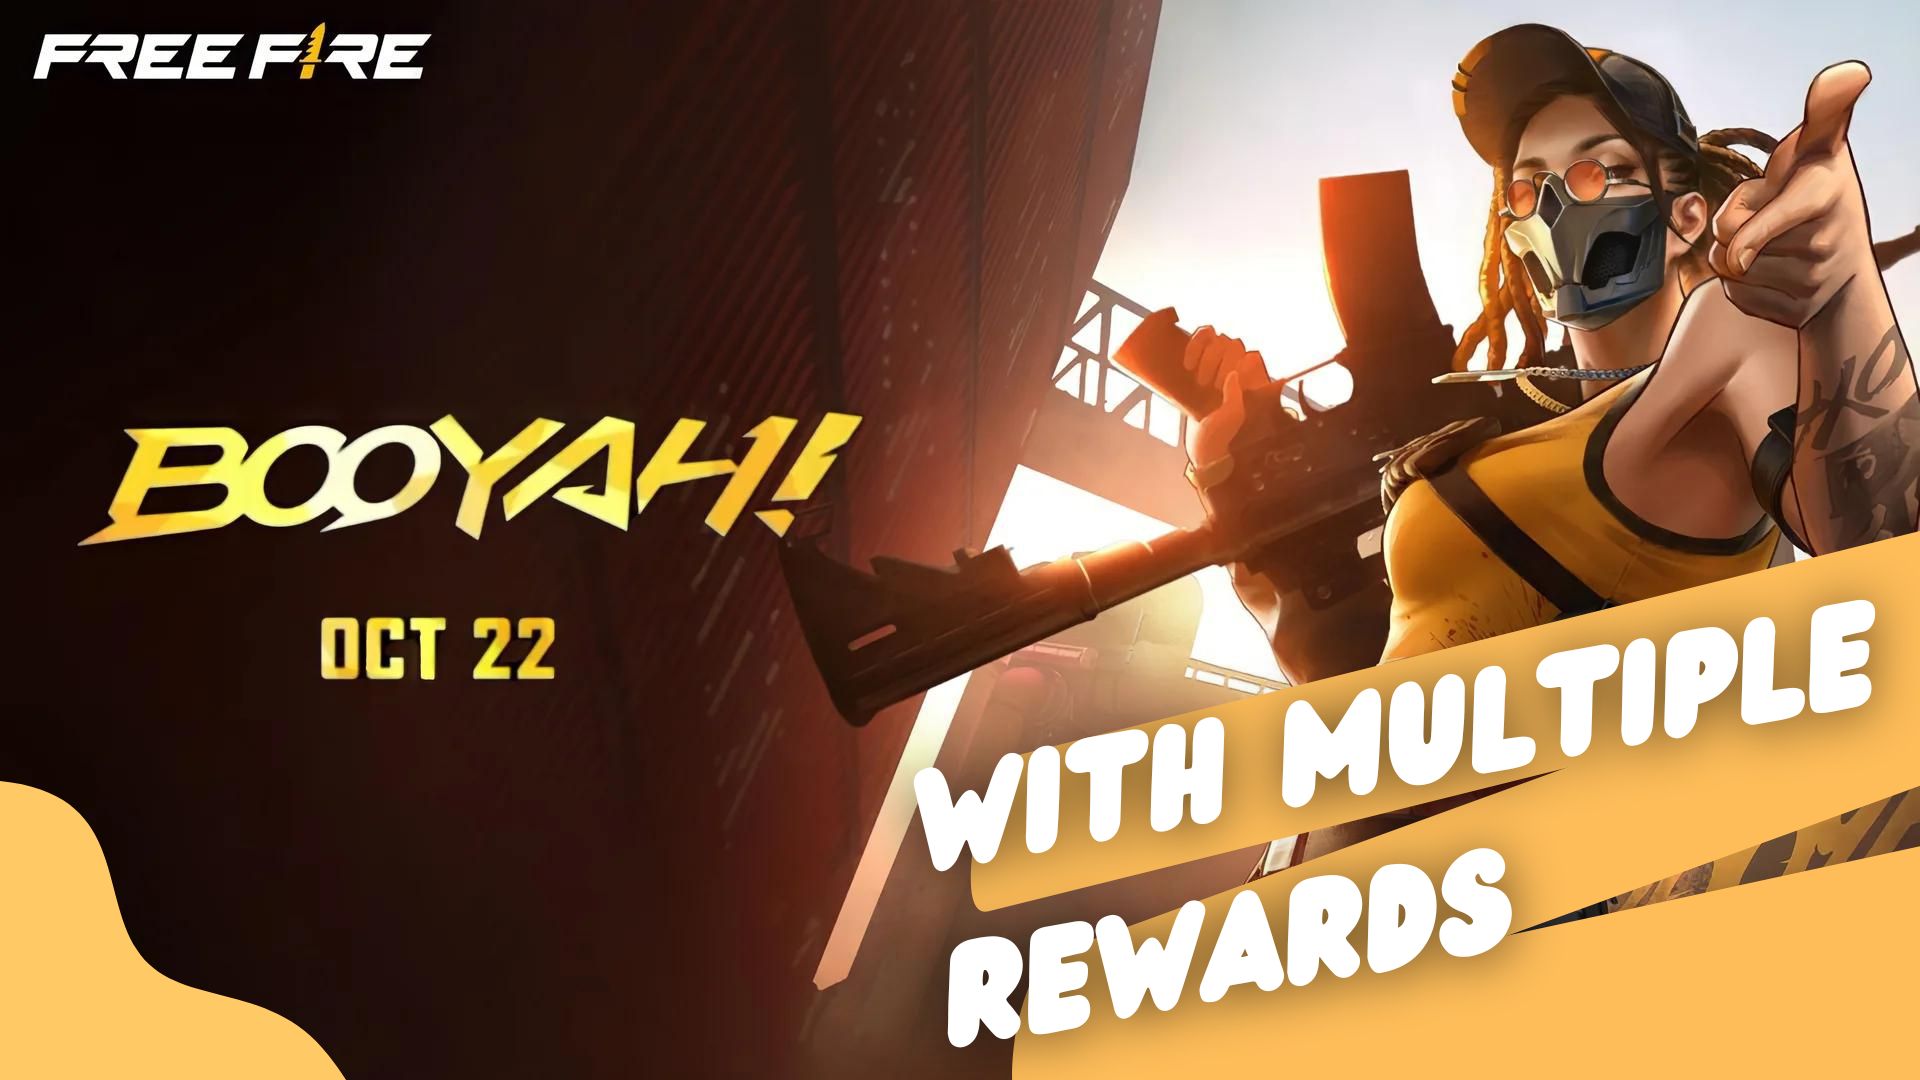 Bring Home the “BOOYAH!” with Smart Controls in Free Fire on PC